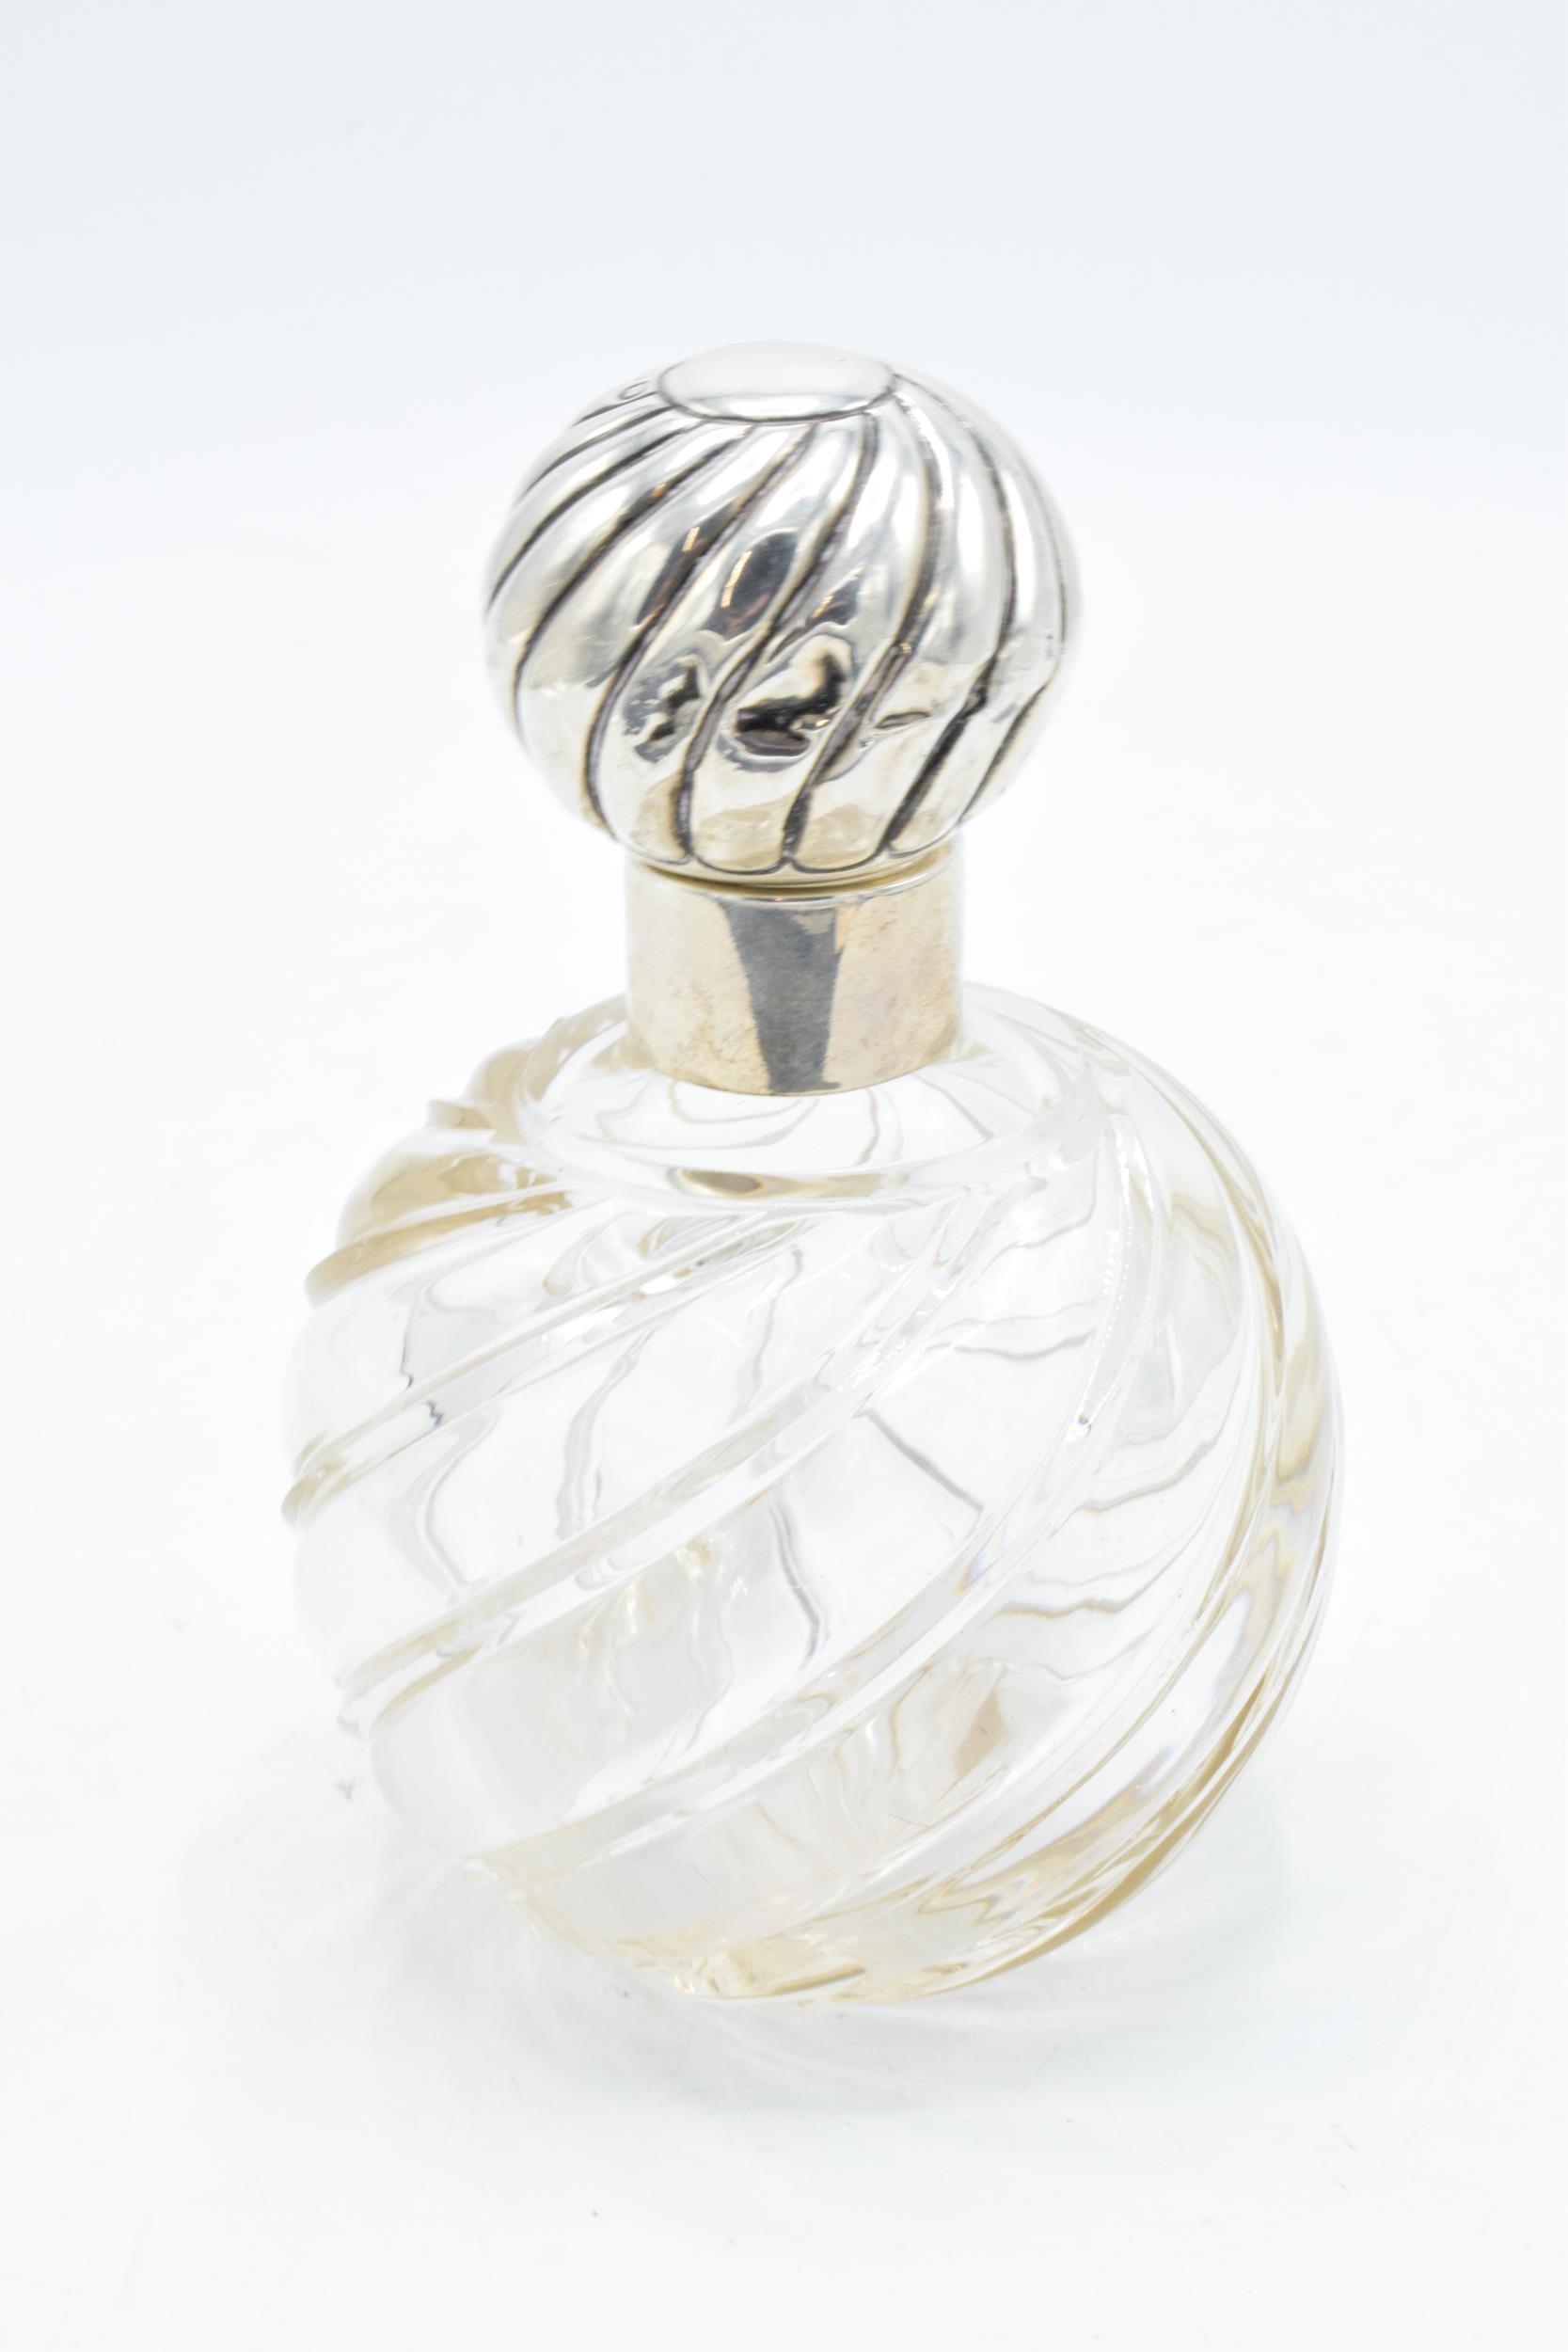 Silver topped scent bottle with swirling glass decoration 13cm tall. Hallmarked for London, - Image 2 of 6